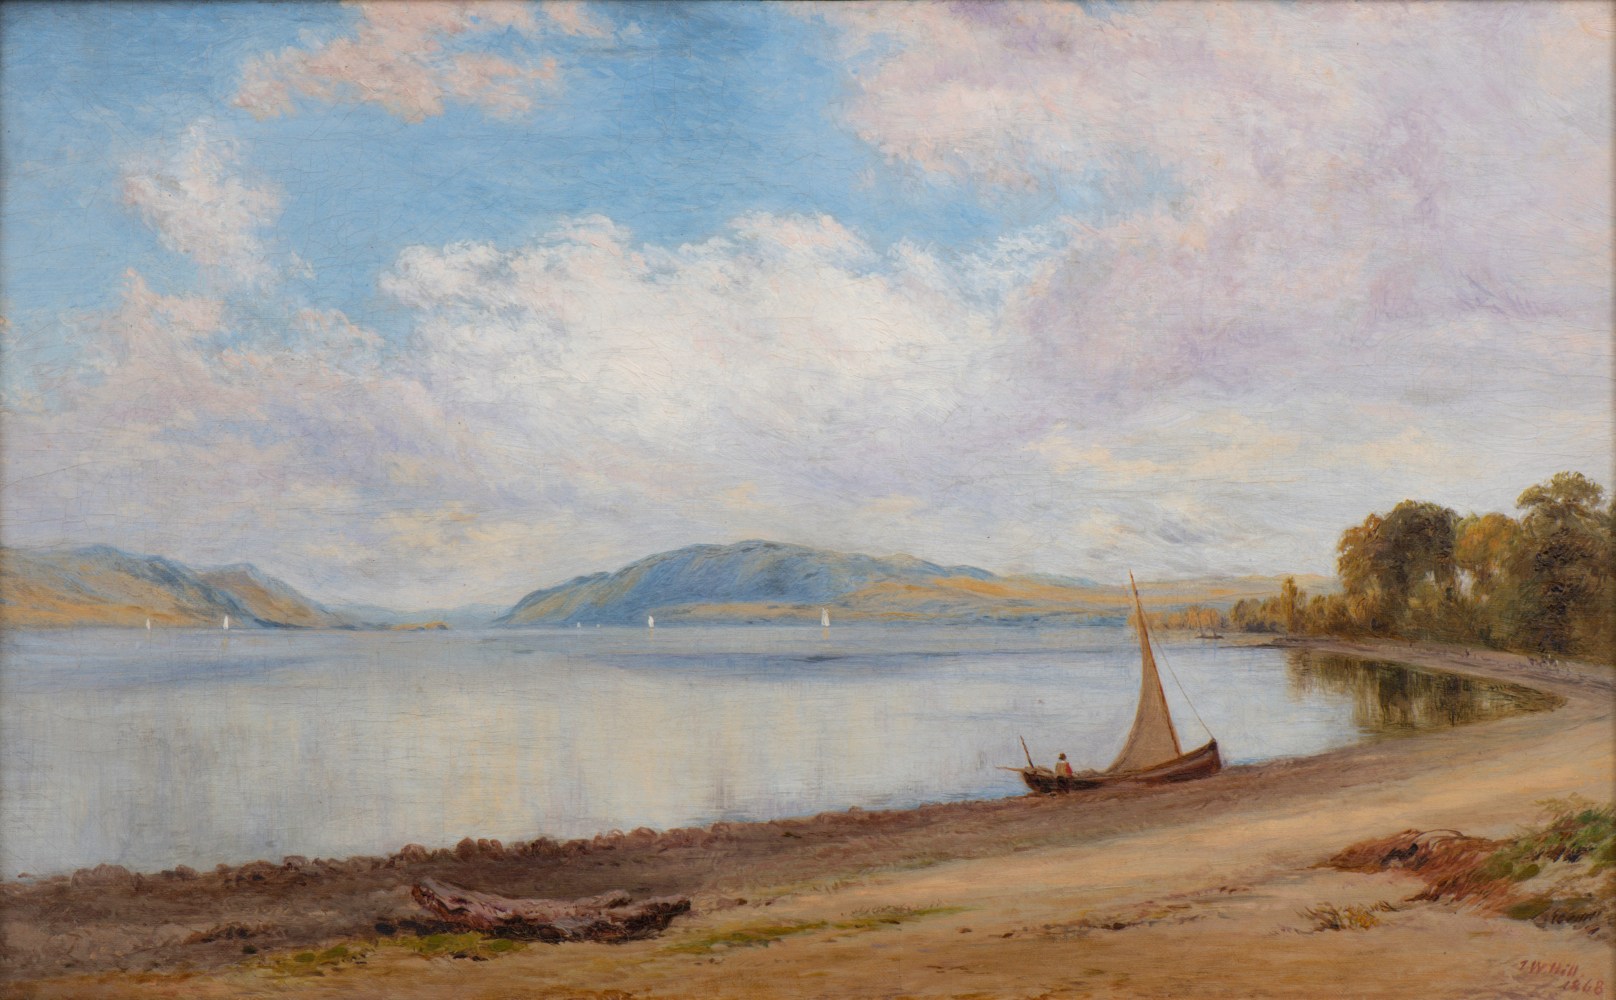 John William Hill (1812–1879) Afternoon, Newburgh-on-Hudson, 1868. Oil on canvas, 15 x 24 in. Signed and dated lower right: J. W. Hill / 1868